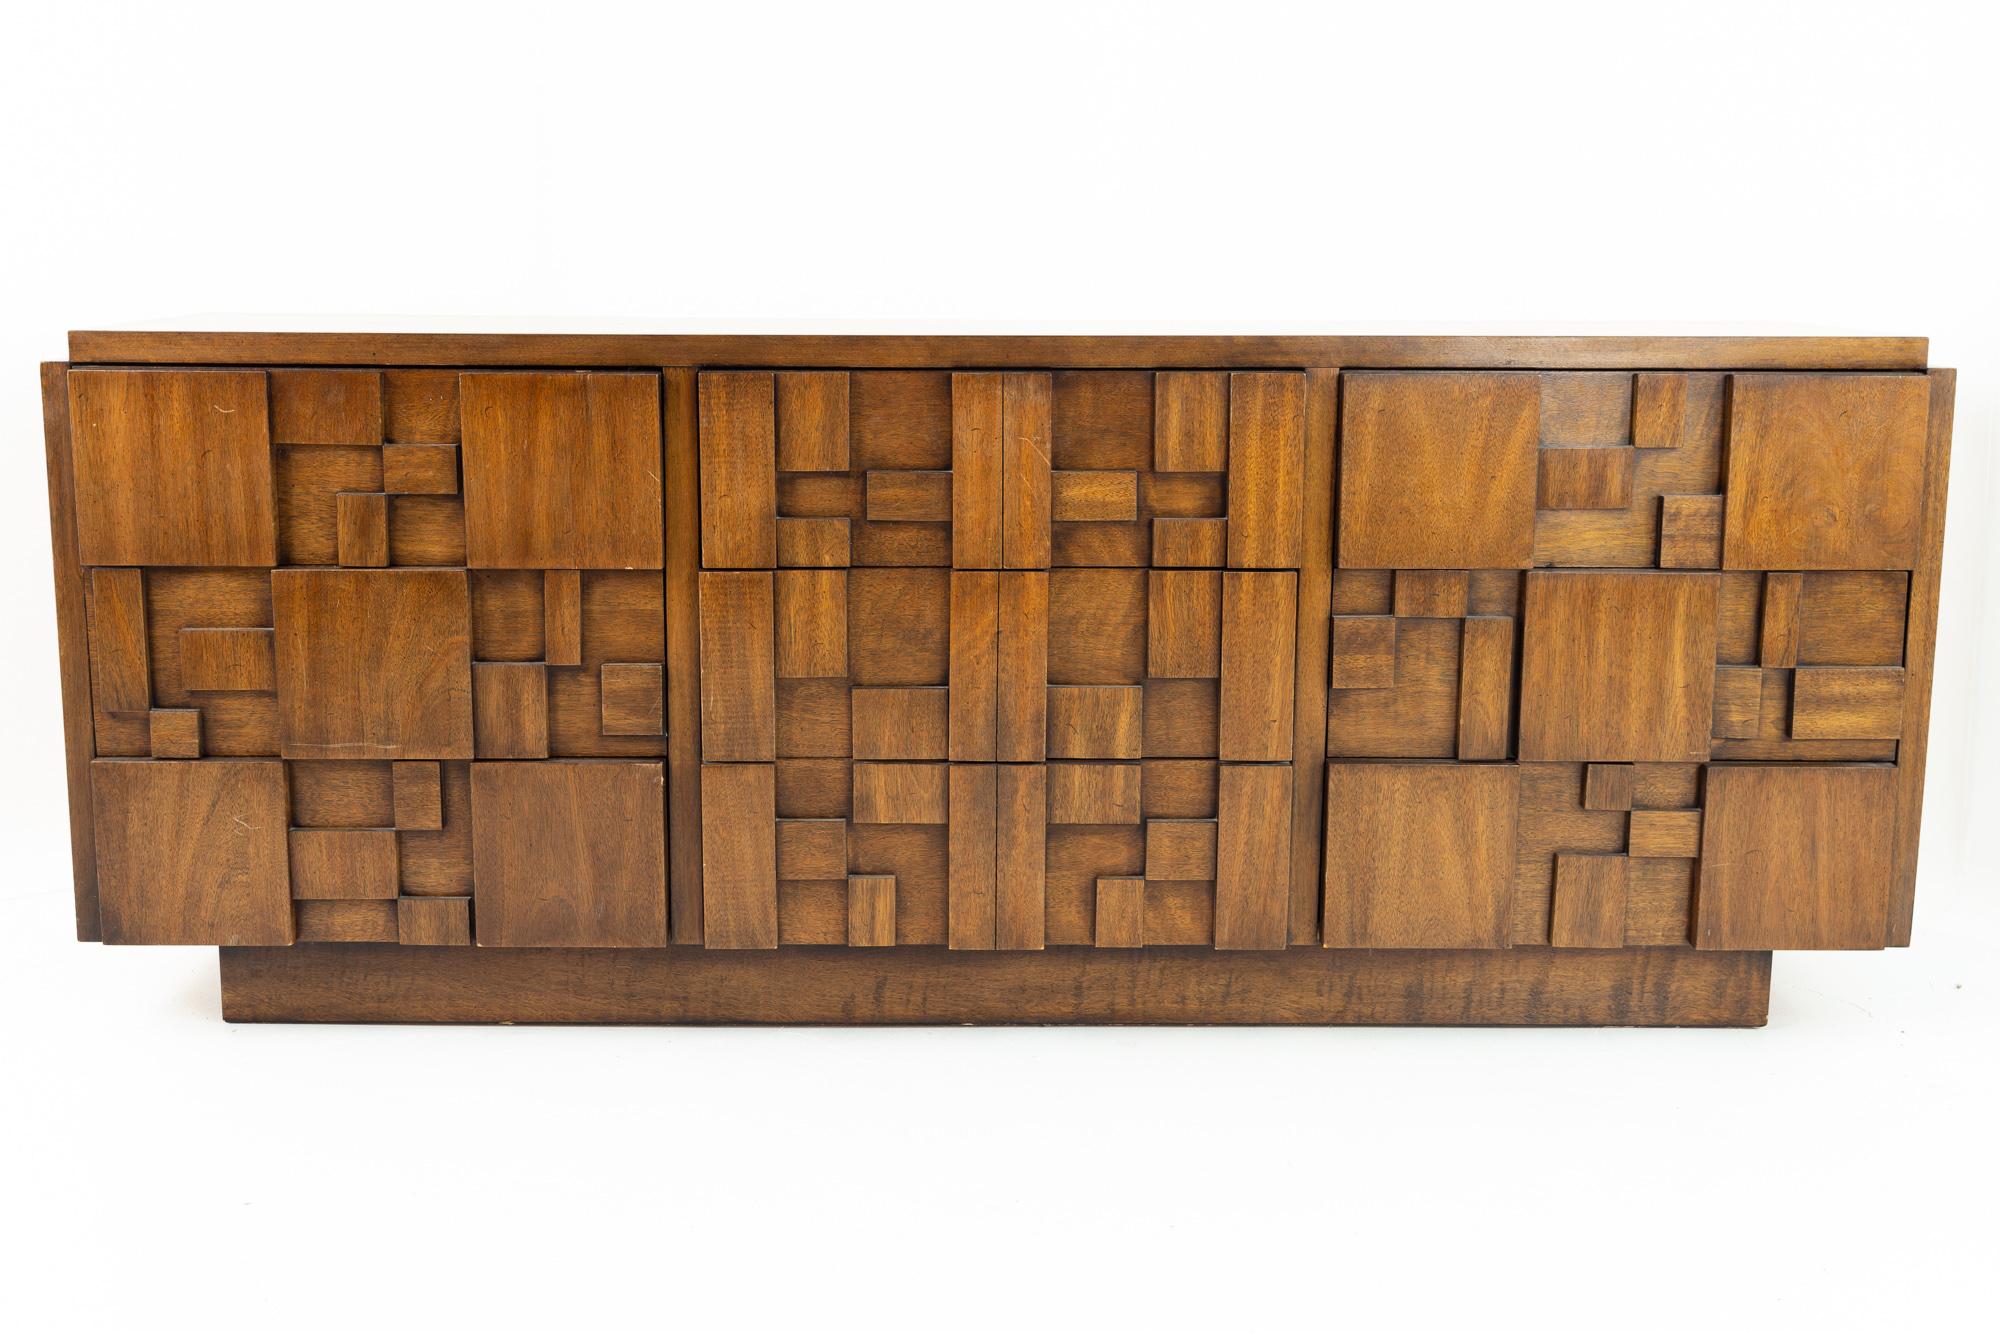 Lane Staccato Brutalist Mid Century 9 Drawer Walnut Lowboy Dresser

This credenza measures: 78 wide x 18.75 deep x 30 inches high

All pieces of furniture can be had in what we call restored vintage condition. That means the piece is restored